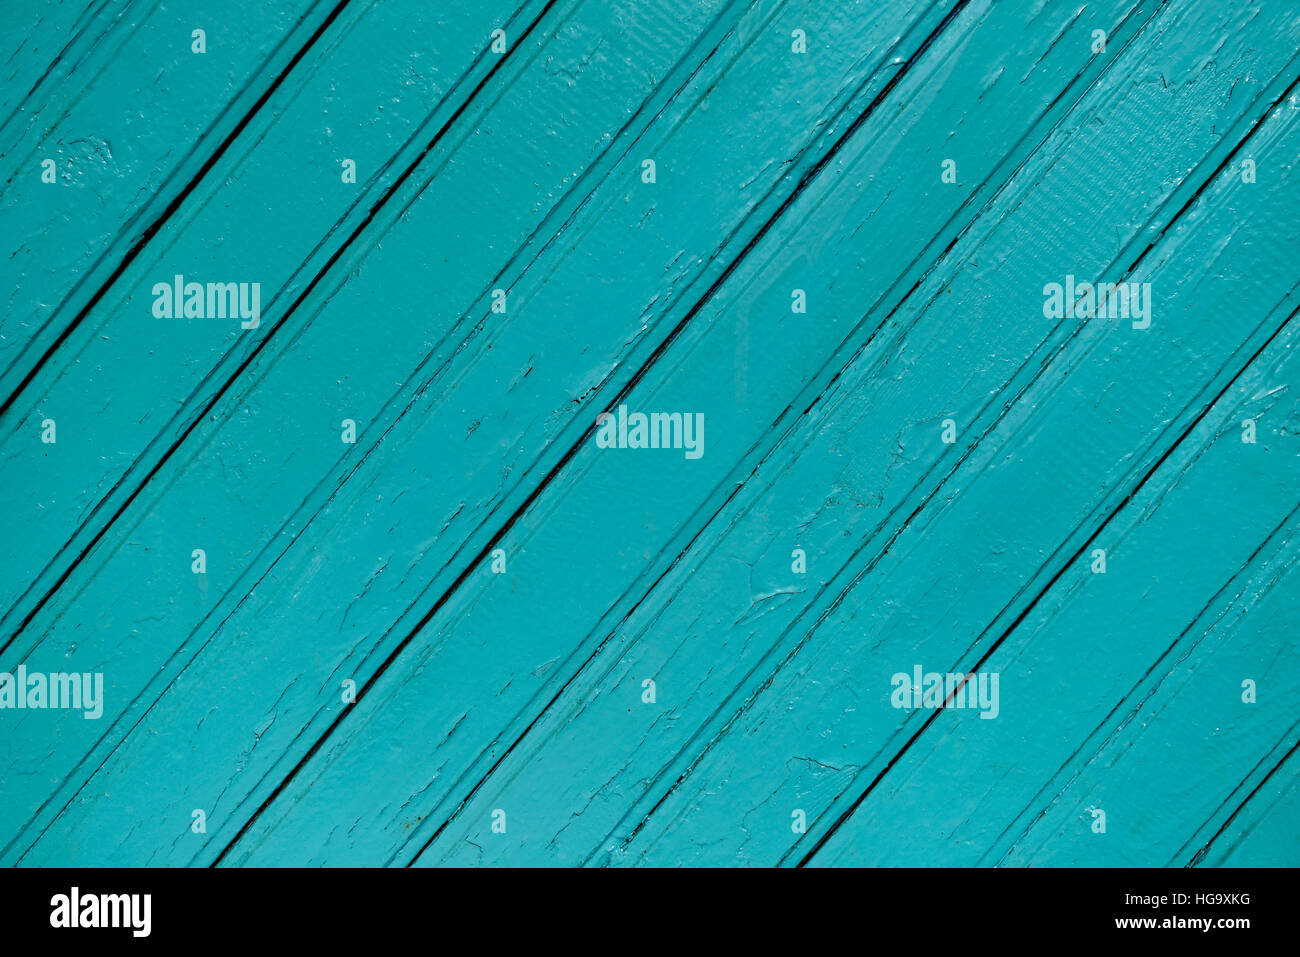 Wood blue painted background with diagonal lines Stock Photo